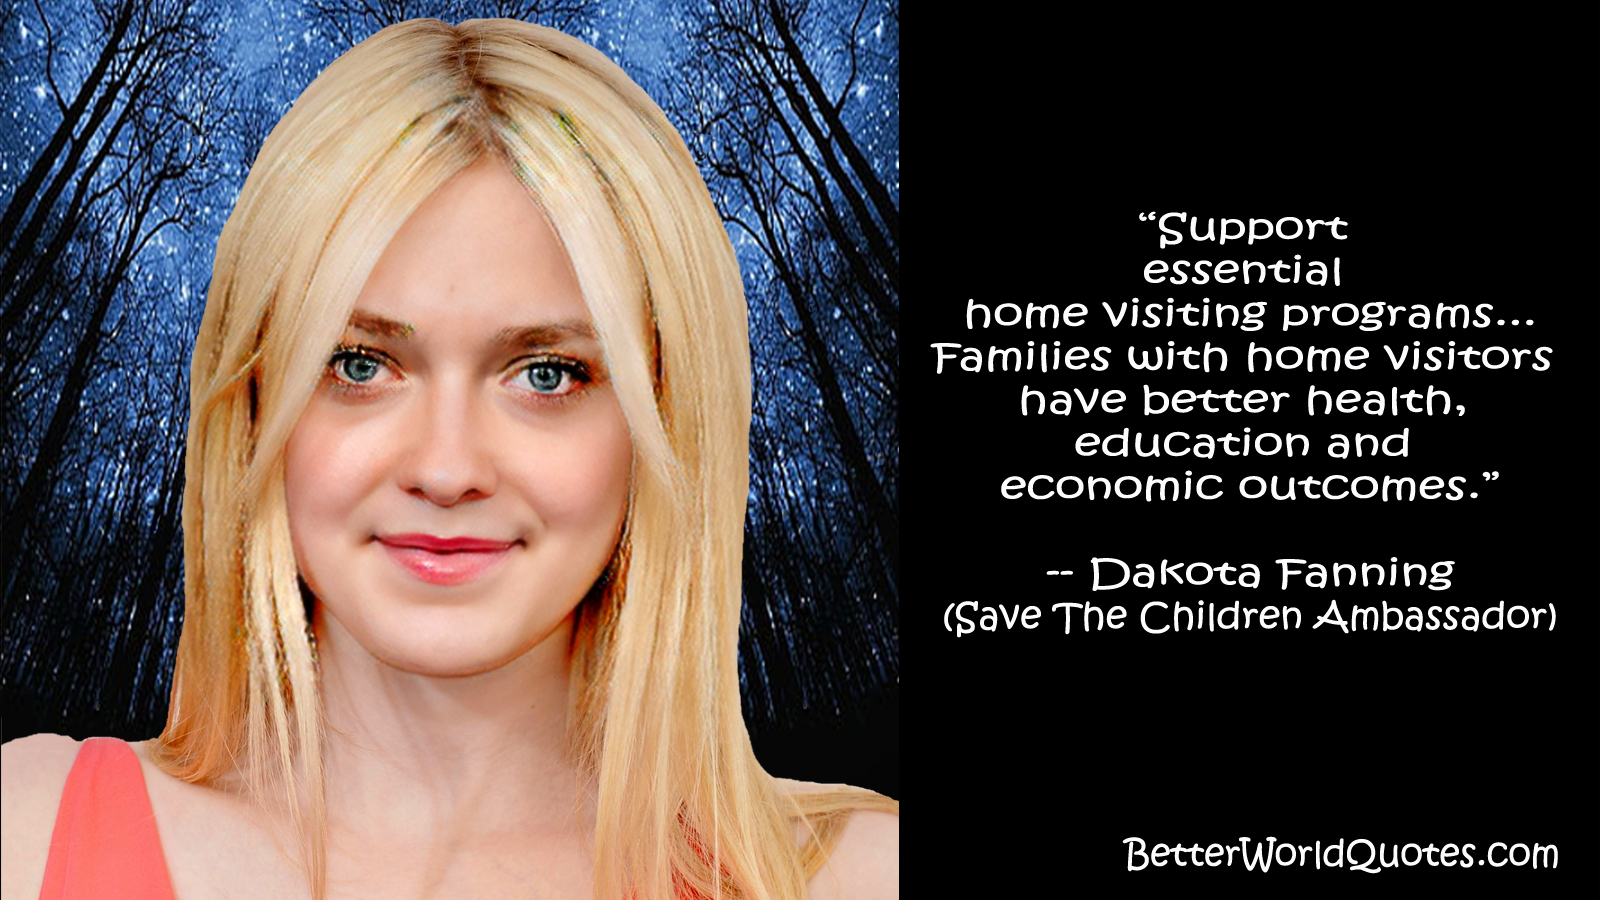 Dakota Fanning: Support essential home visiting programs...Families with home visitors have better health, education and economic outcomes.